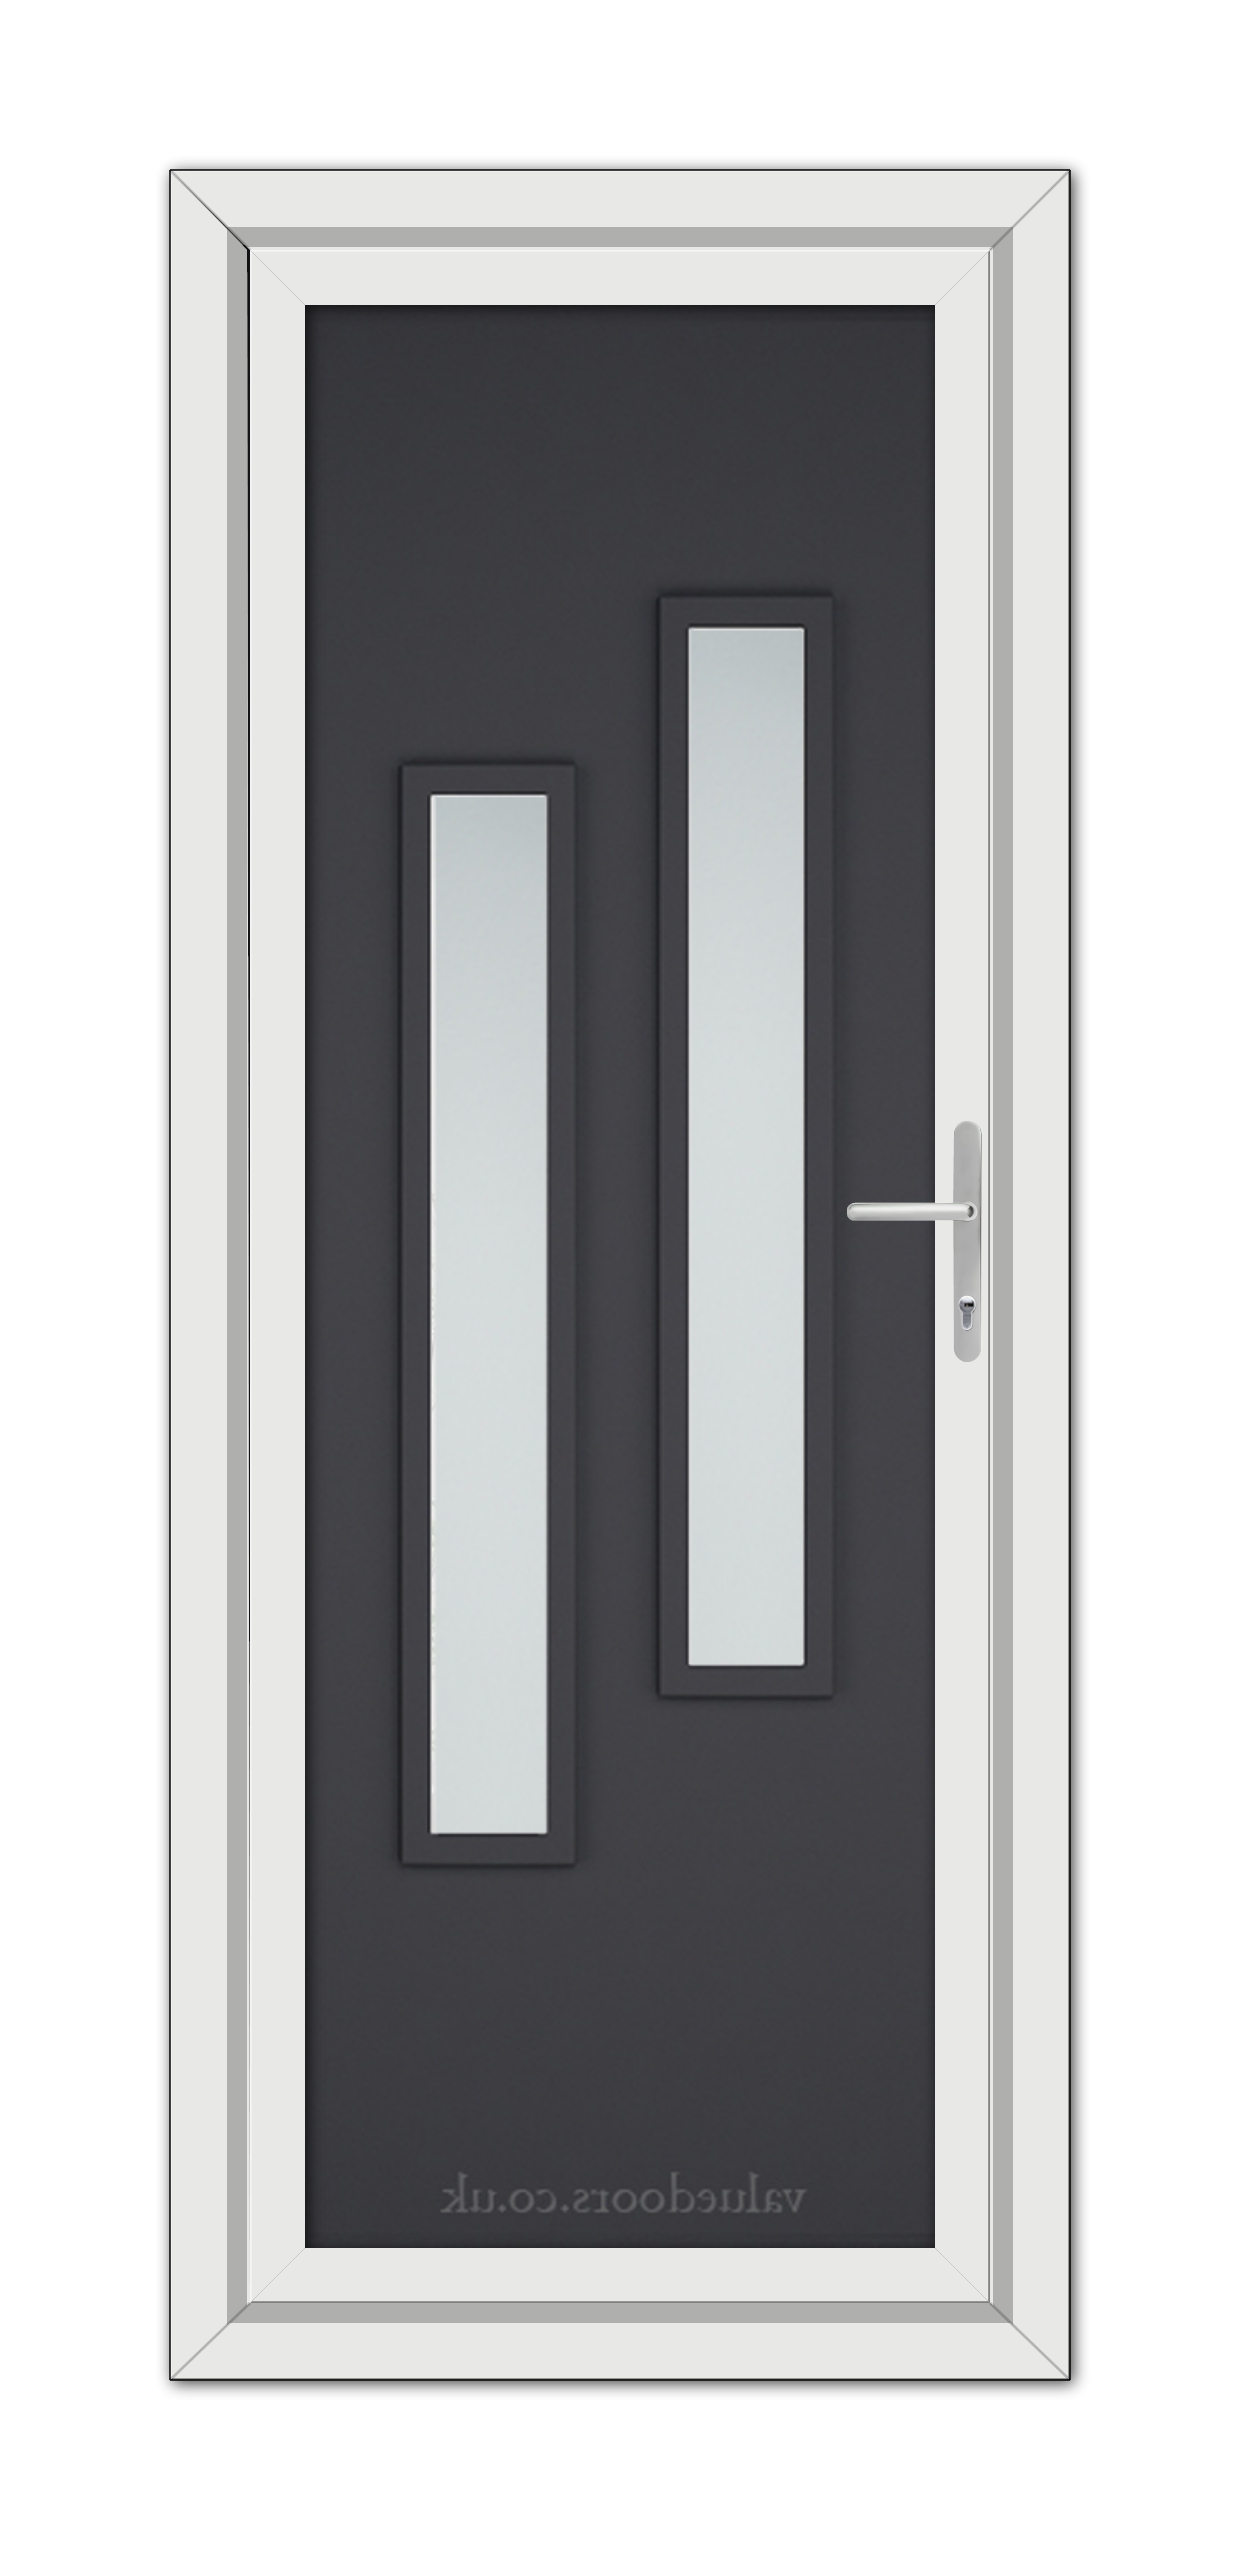 A Grey Modern 5082 uPVC Door with two vertical glass panels and a silver handle, set within a white frame.